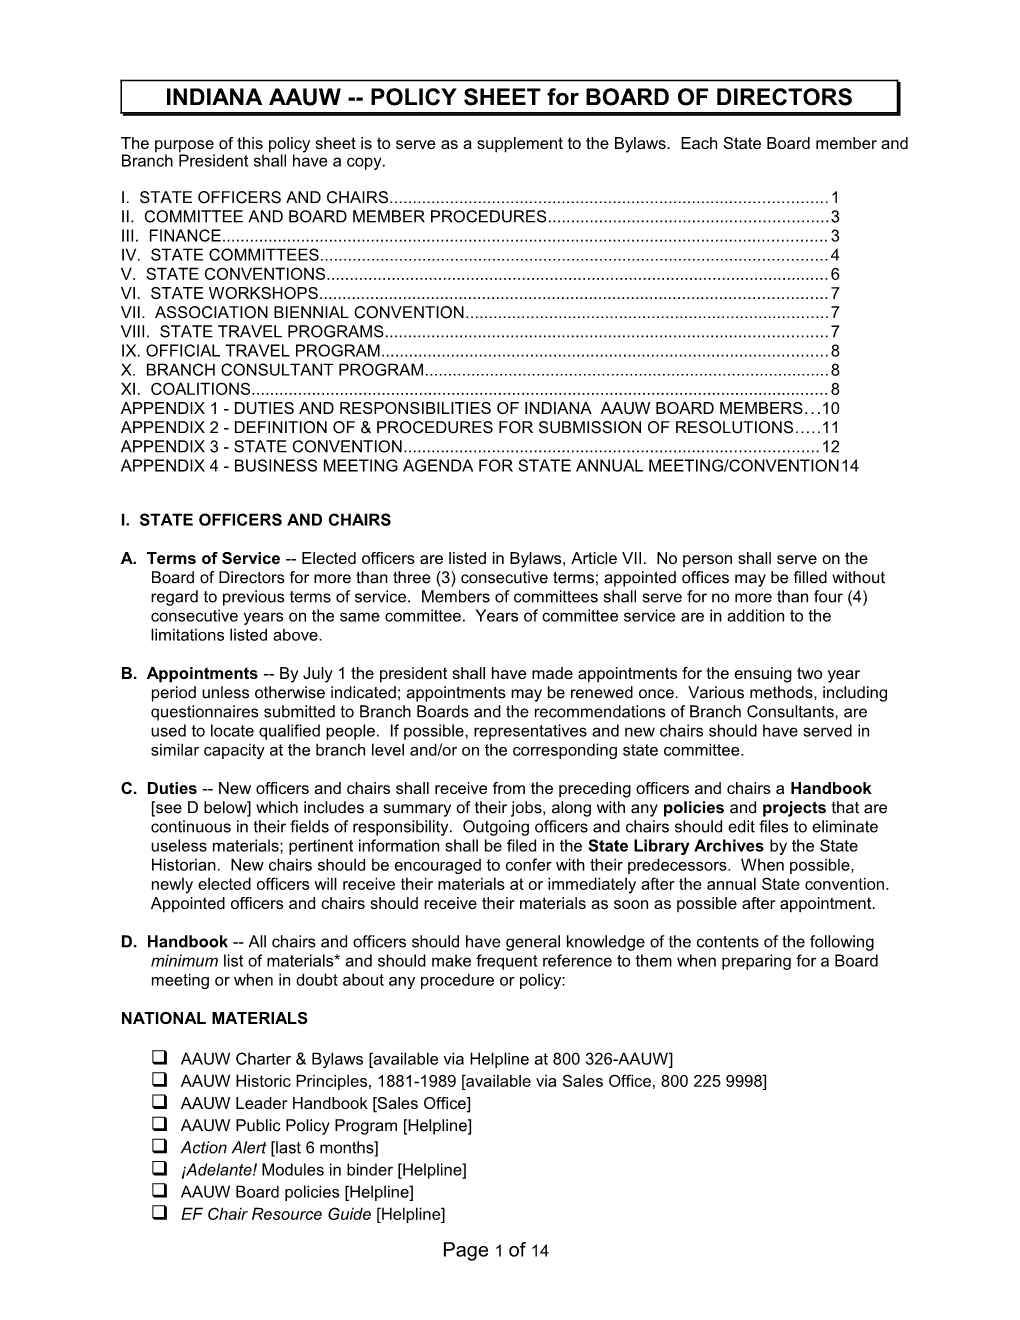 INDIANA STATE POLICY SHEET for BOARD of DIRECTORS